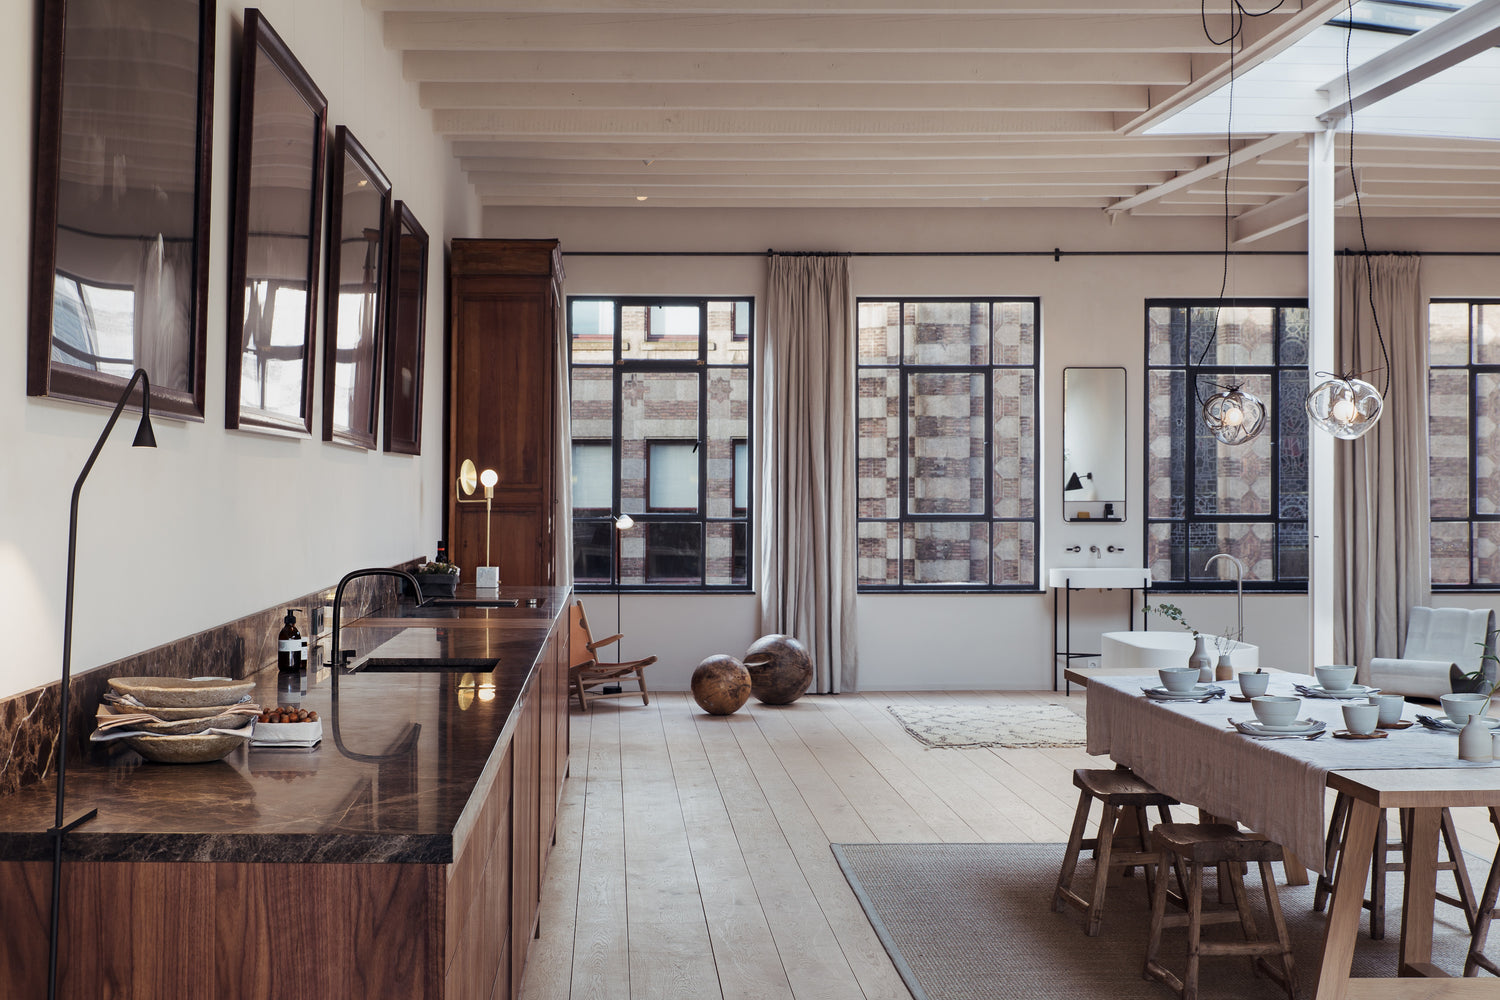 a light and lofty open kitchen and dining room interior - The Loft IV - MISS BARE - Enter The Loft